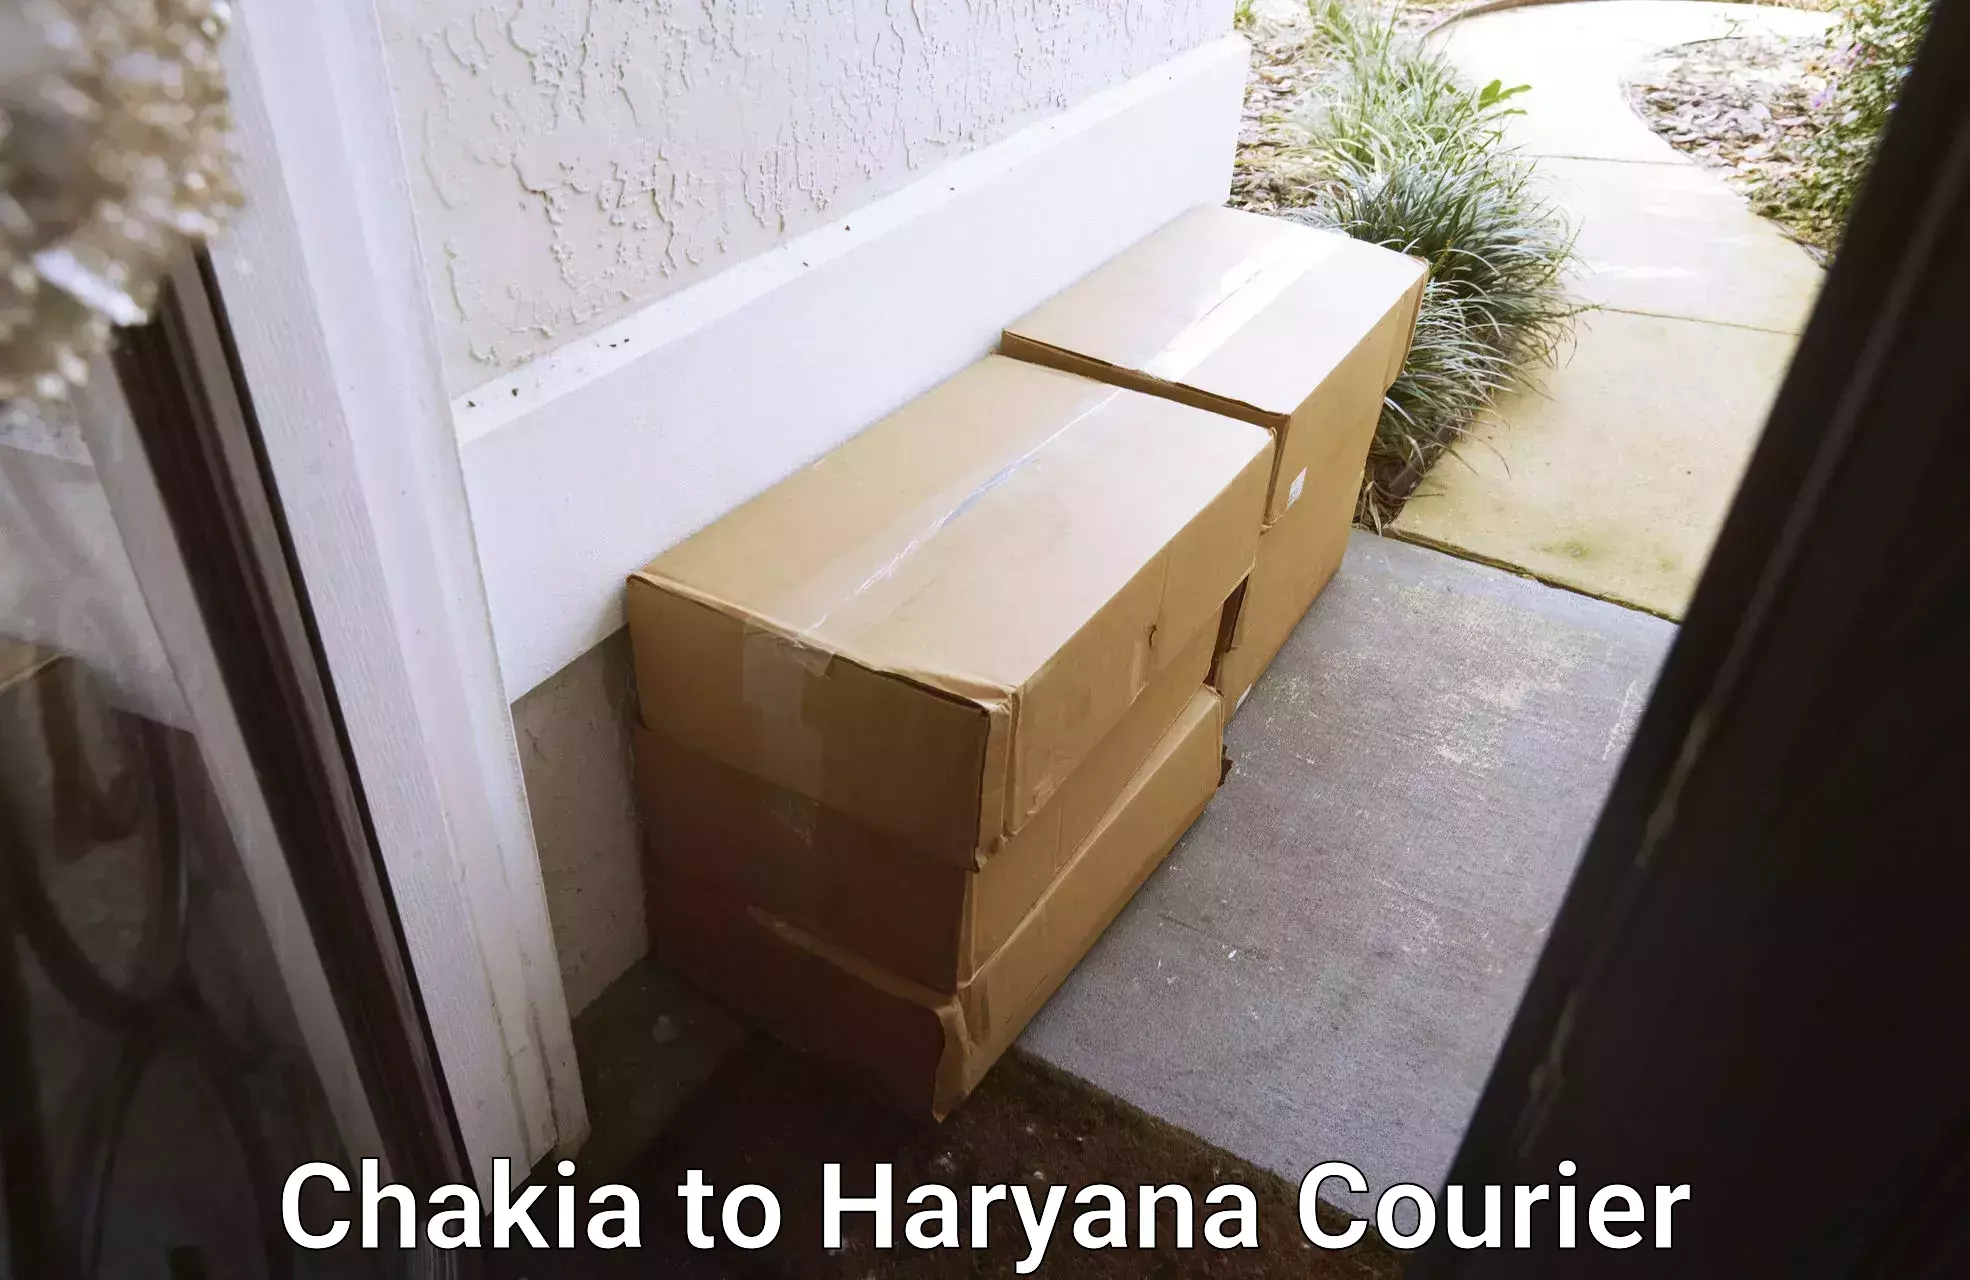 Efficient packing and moving Chakia to Haryana